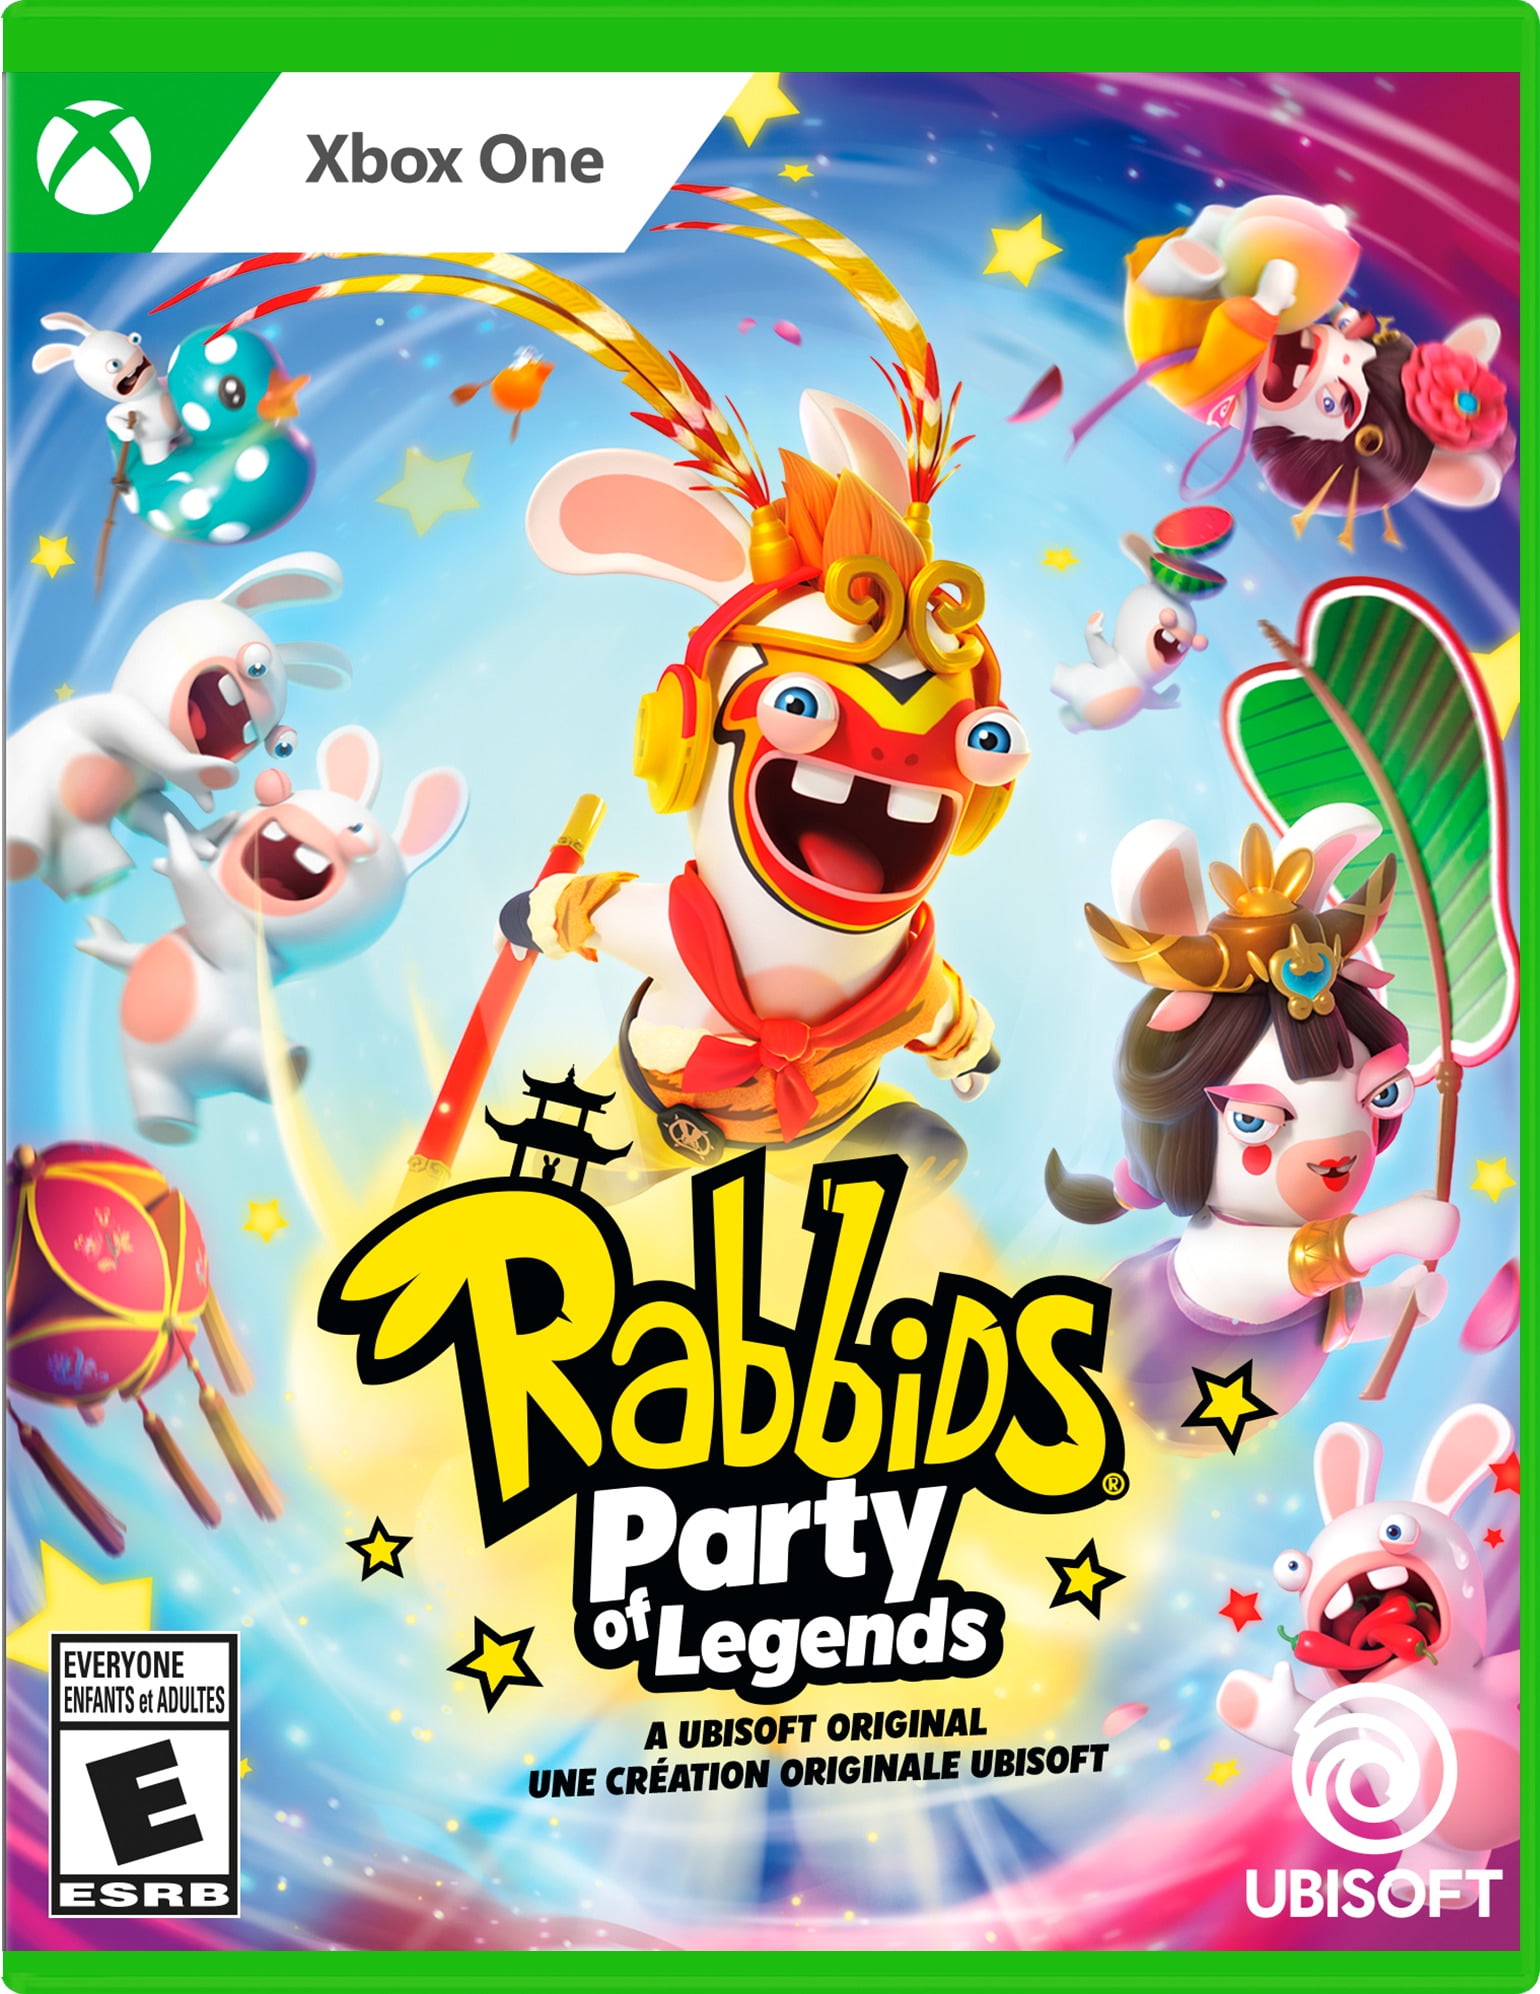 Rabbids Party of Legends - Xbox One